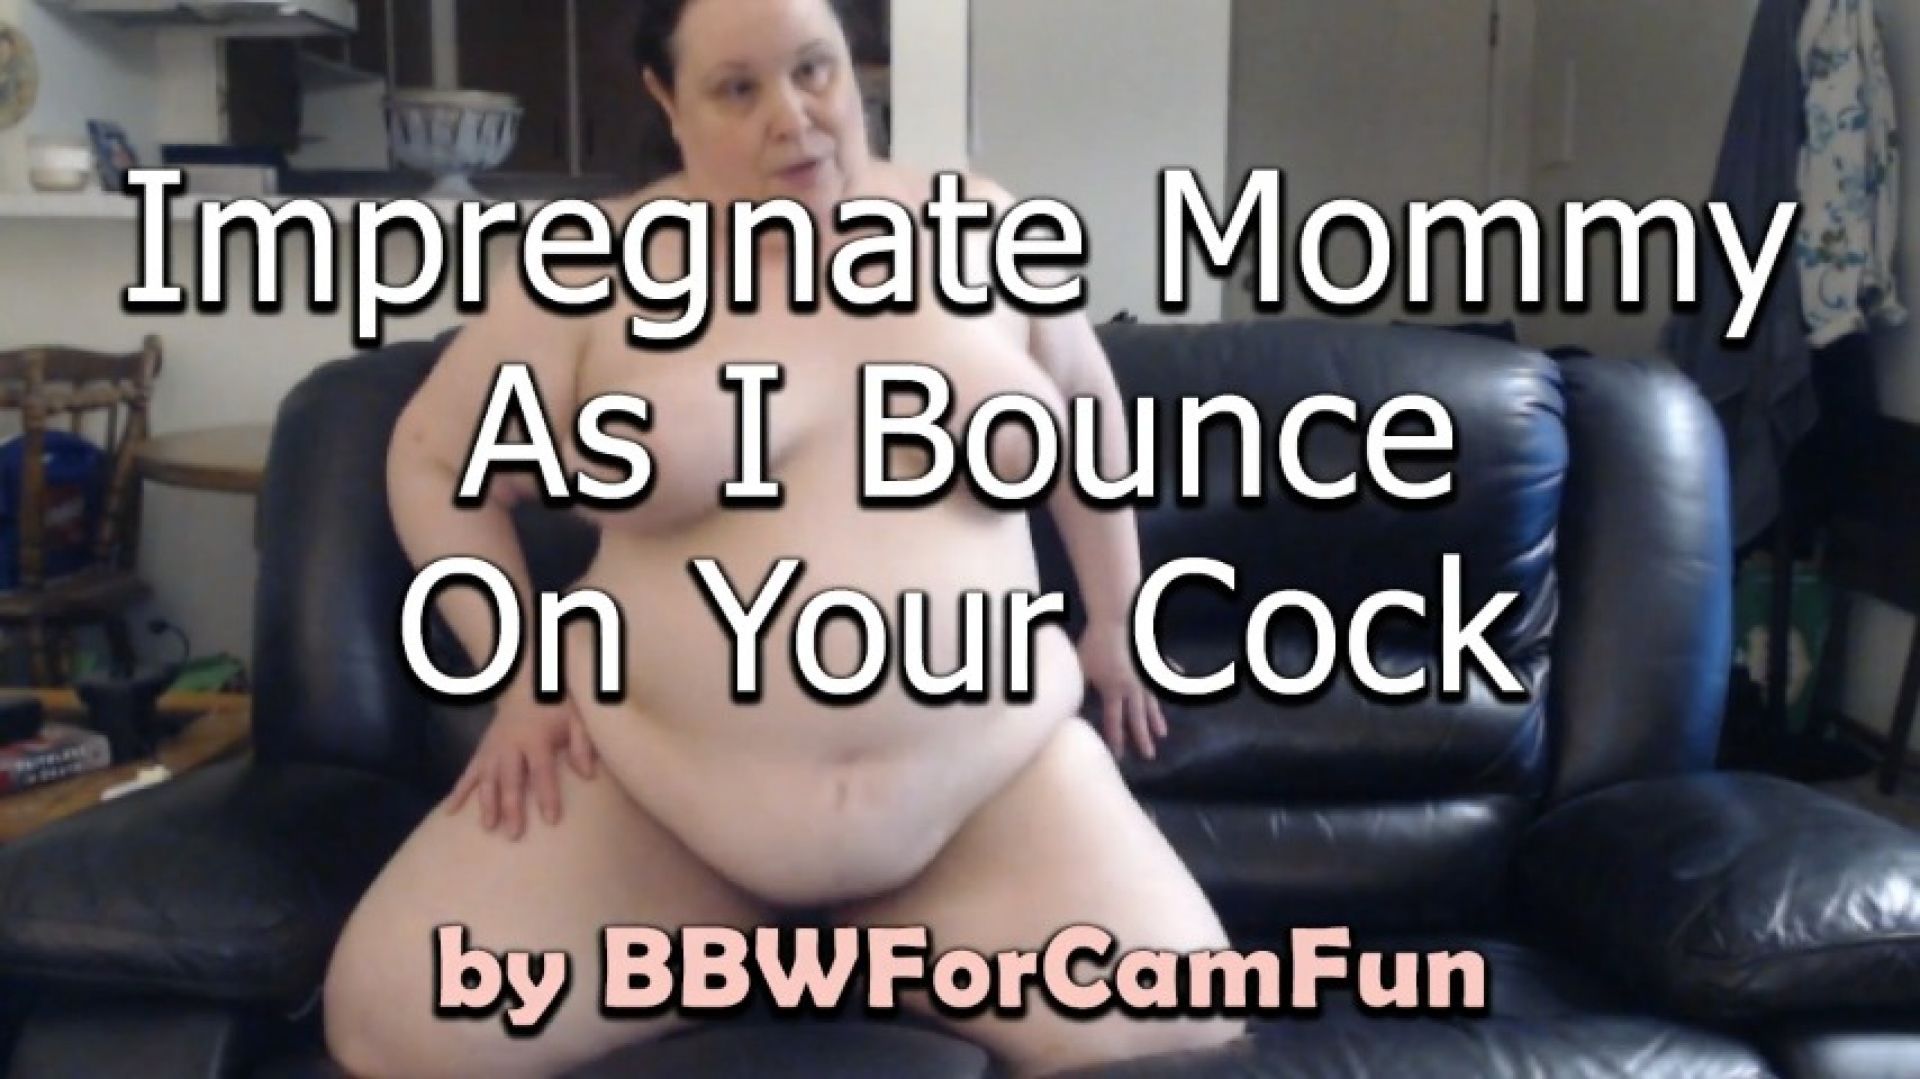 Impregnate Mommy As I Bounce On Your Cock